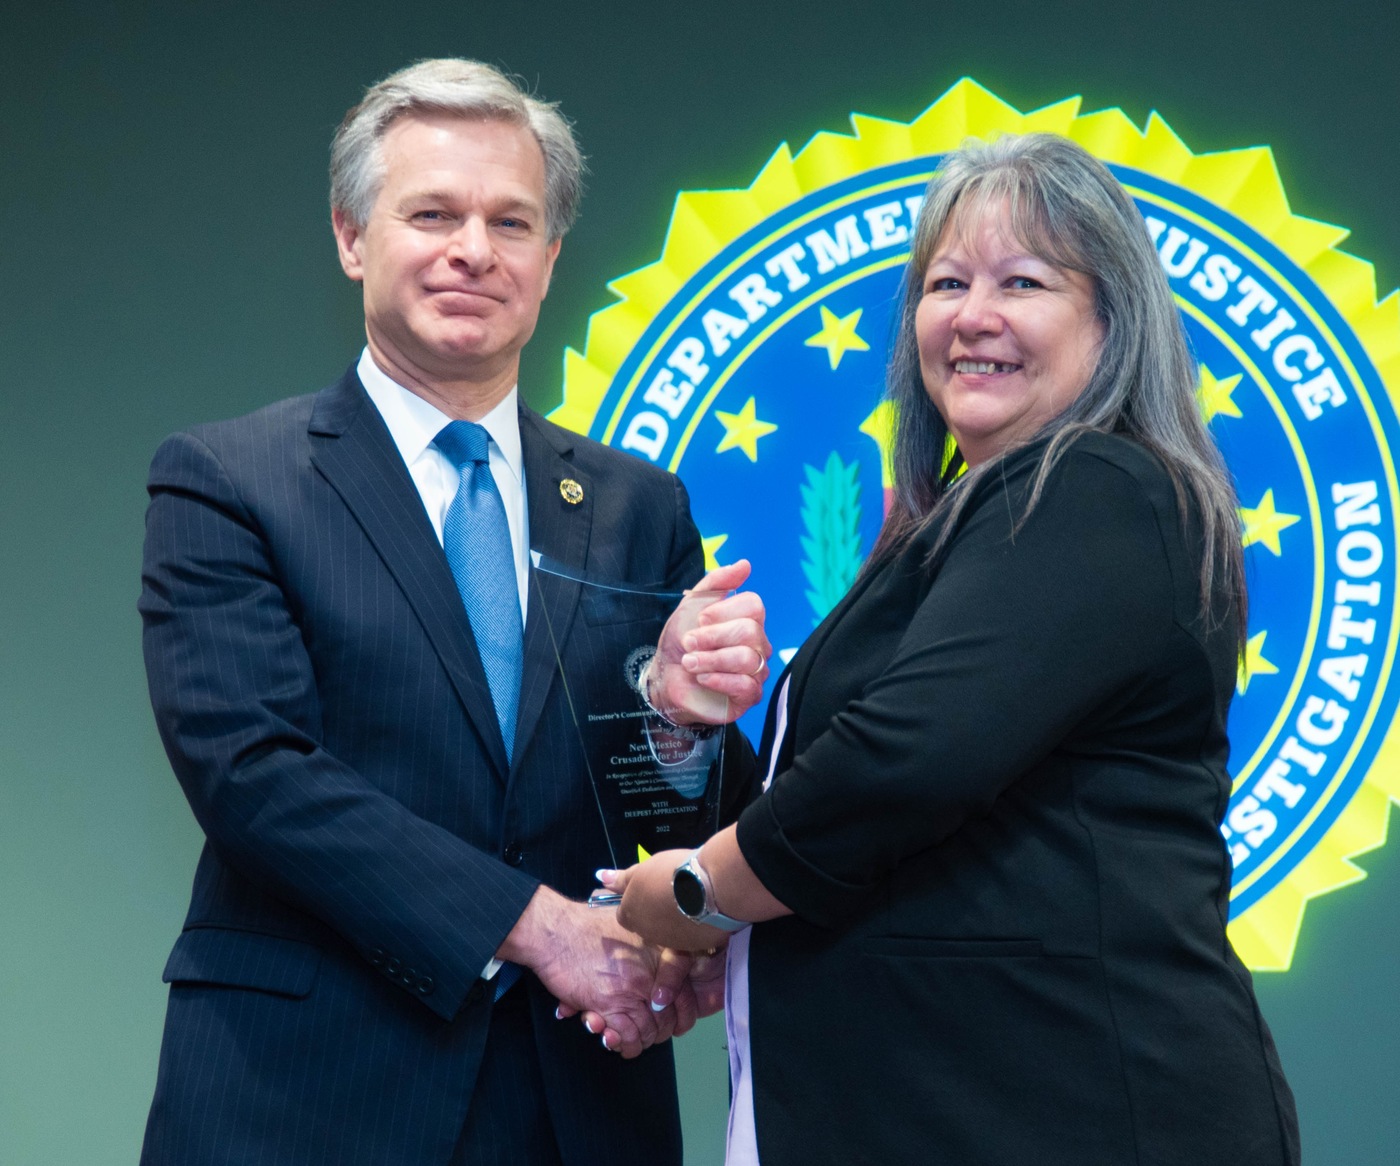 FBI Albuquerque 2022 Director’s Community Leadership Award recipient the New Mexico Crusaders for Justice, represented by Sally Ann Shipman.